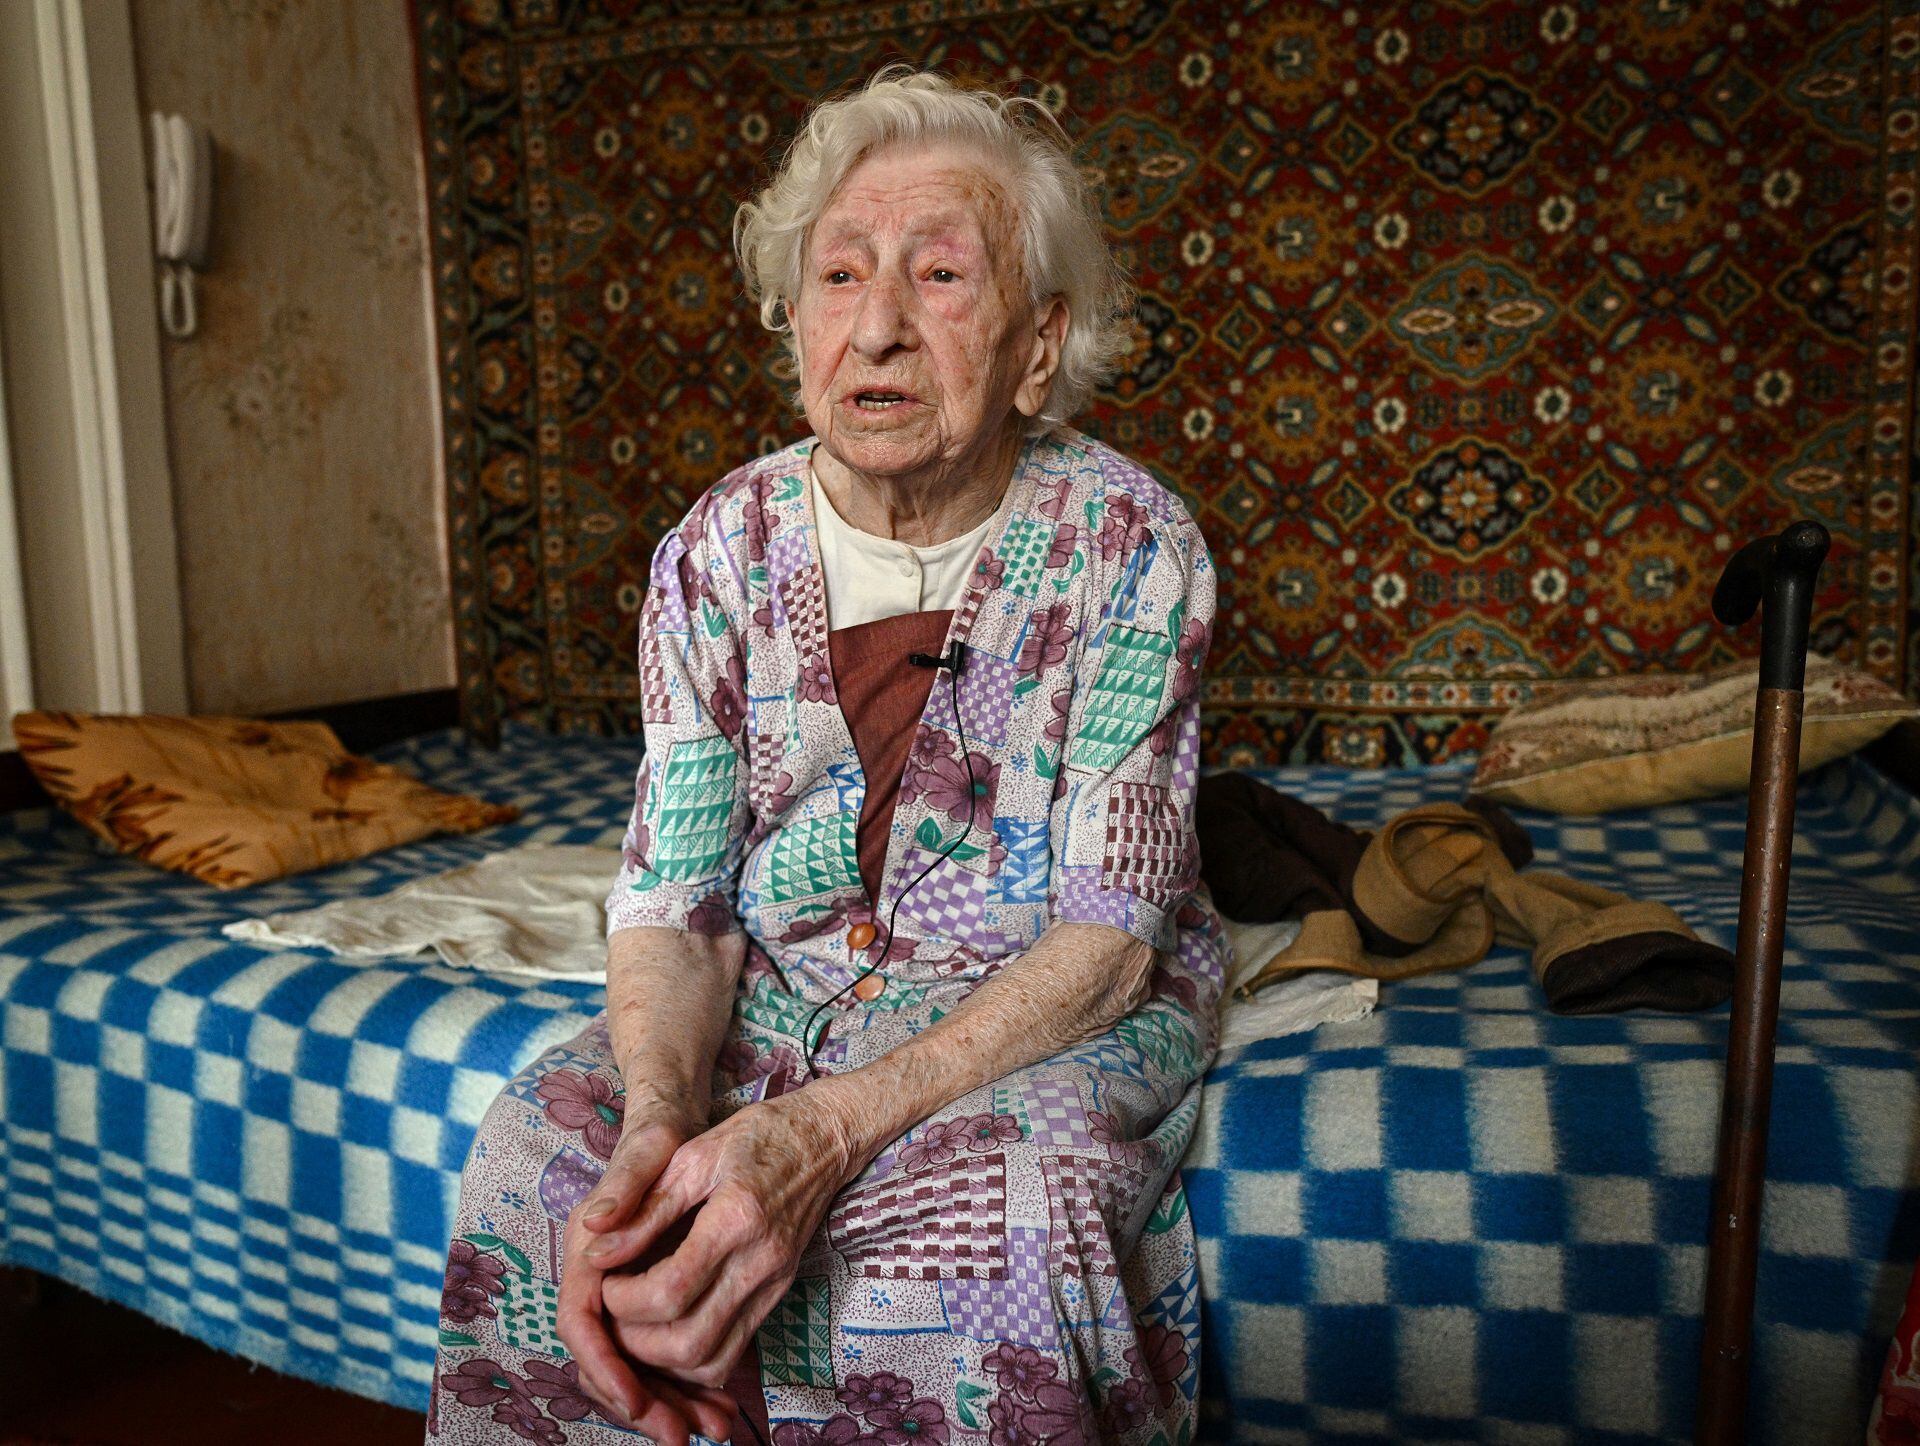 Lyubov Petukhova, 99-years-old, speaks during an interview with AFP in her apartment in Kryvyj Rig, central Ukraine, on September 22, 2022, as the Russia-Ukraine war enters its 211th day. - For some of the Ukranian survivors of the Shoah or Holocaus that caused some 1.5 million deaths in Ukraine, today "there are no nazis" in their country, as opposed to what Moscow's Kremlin says as one of its justifications for the Russian invasion of Ukraine on February 24, 2022. (Photo by Genya SAVILOV / AFP)